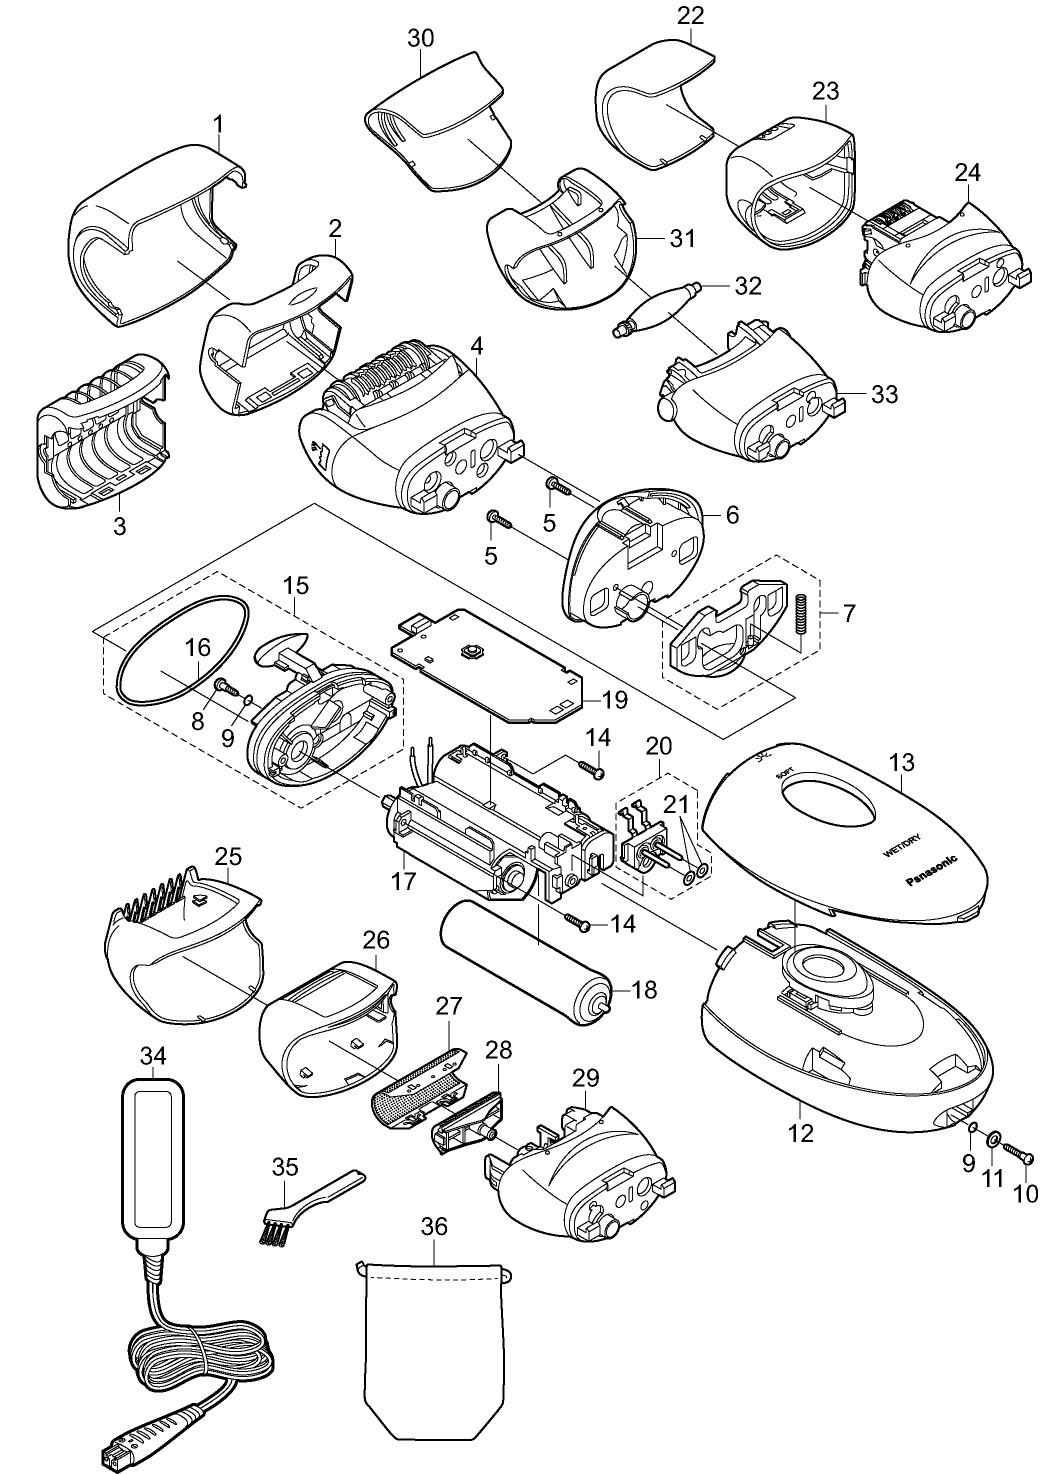 ES-ED90: Exploded View